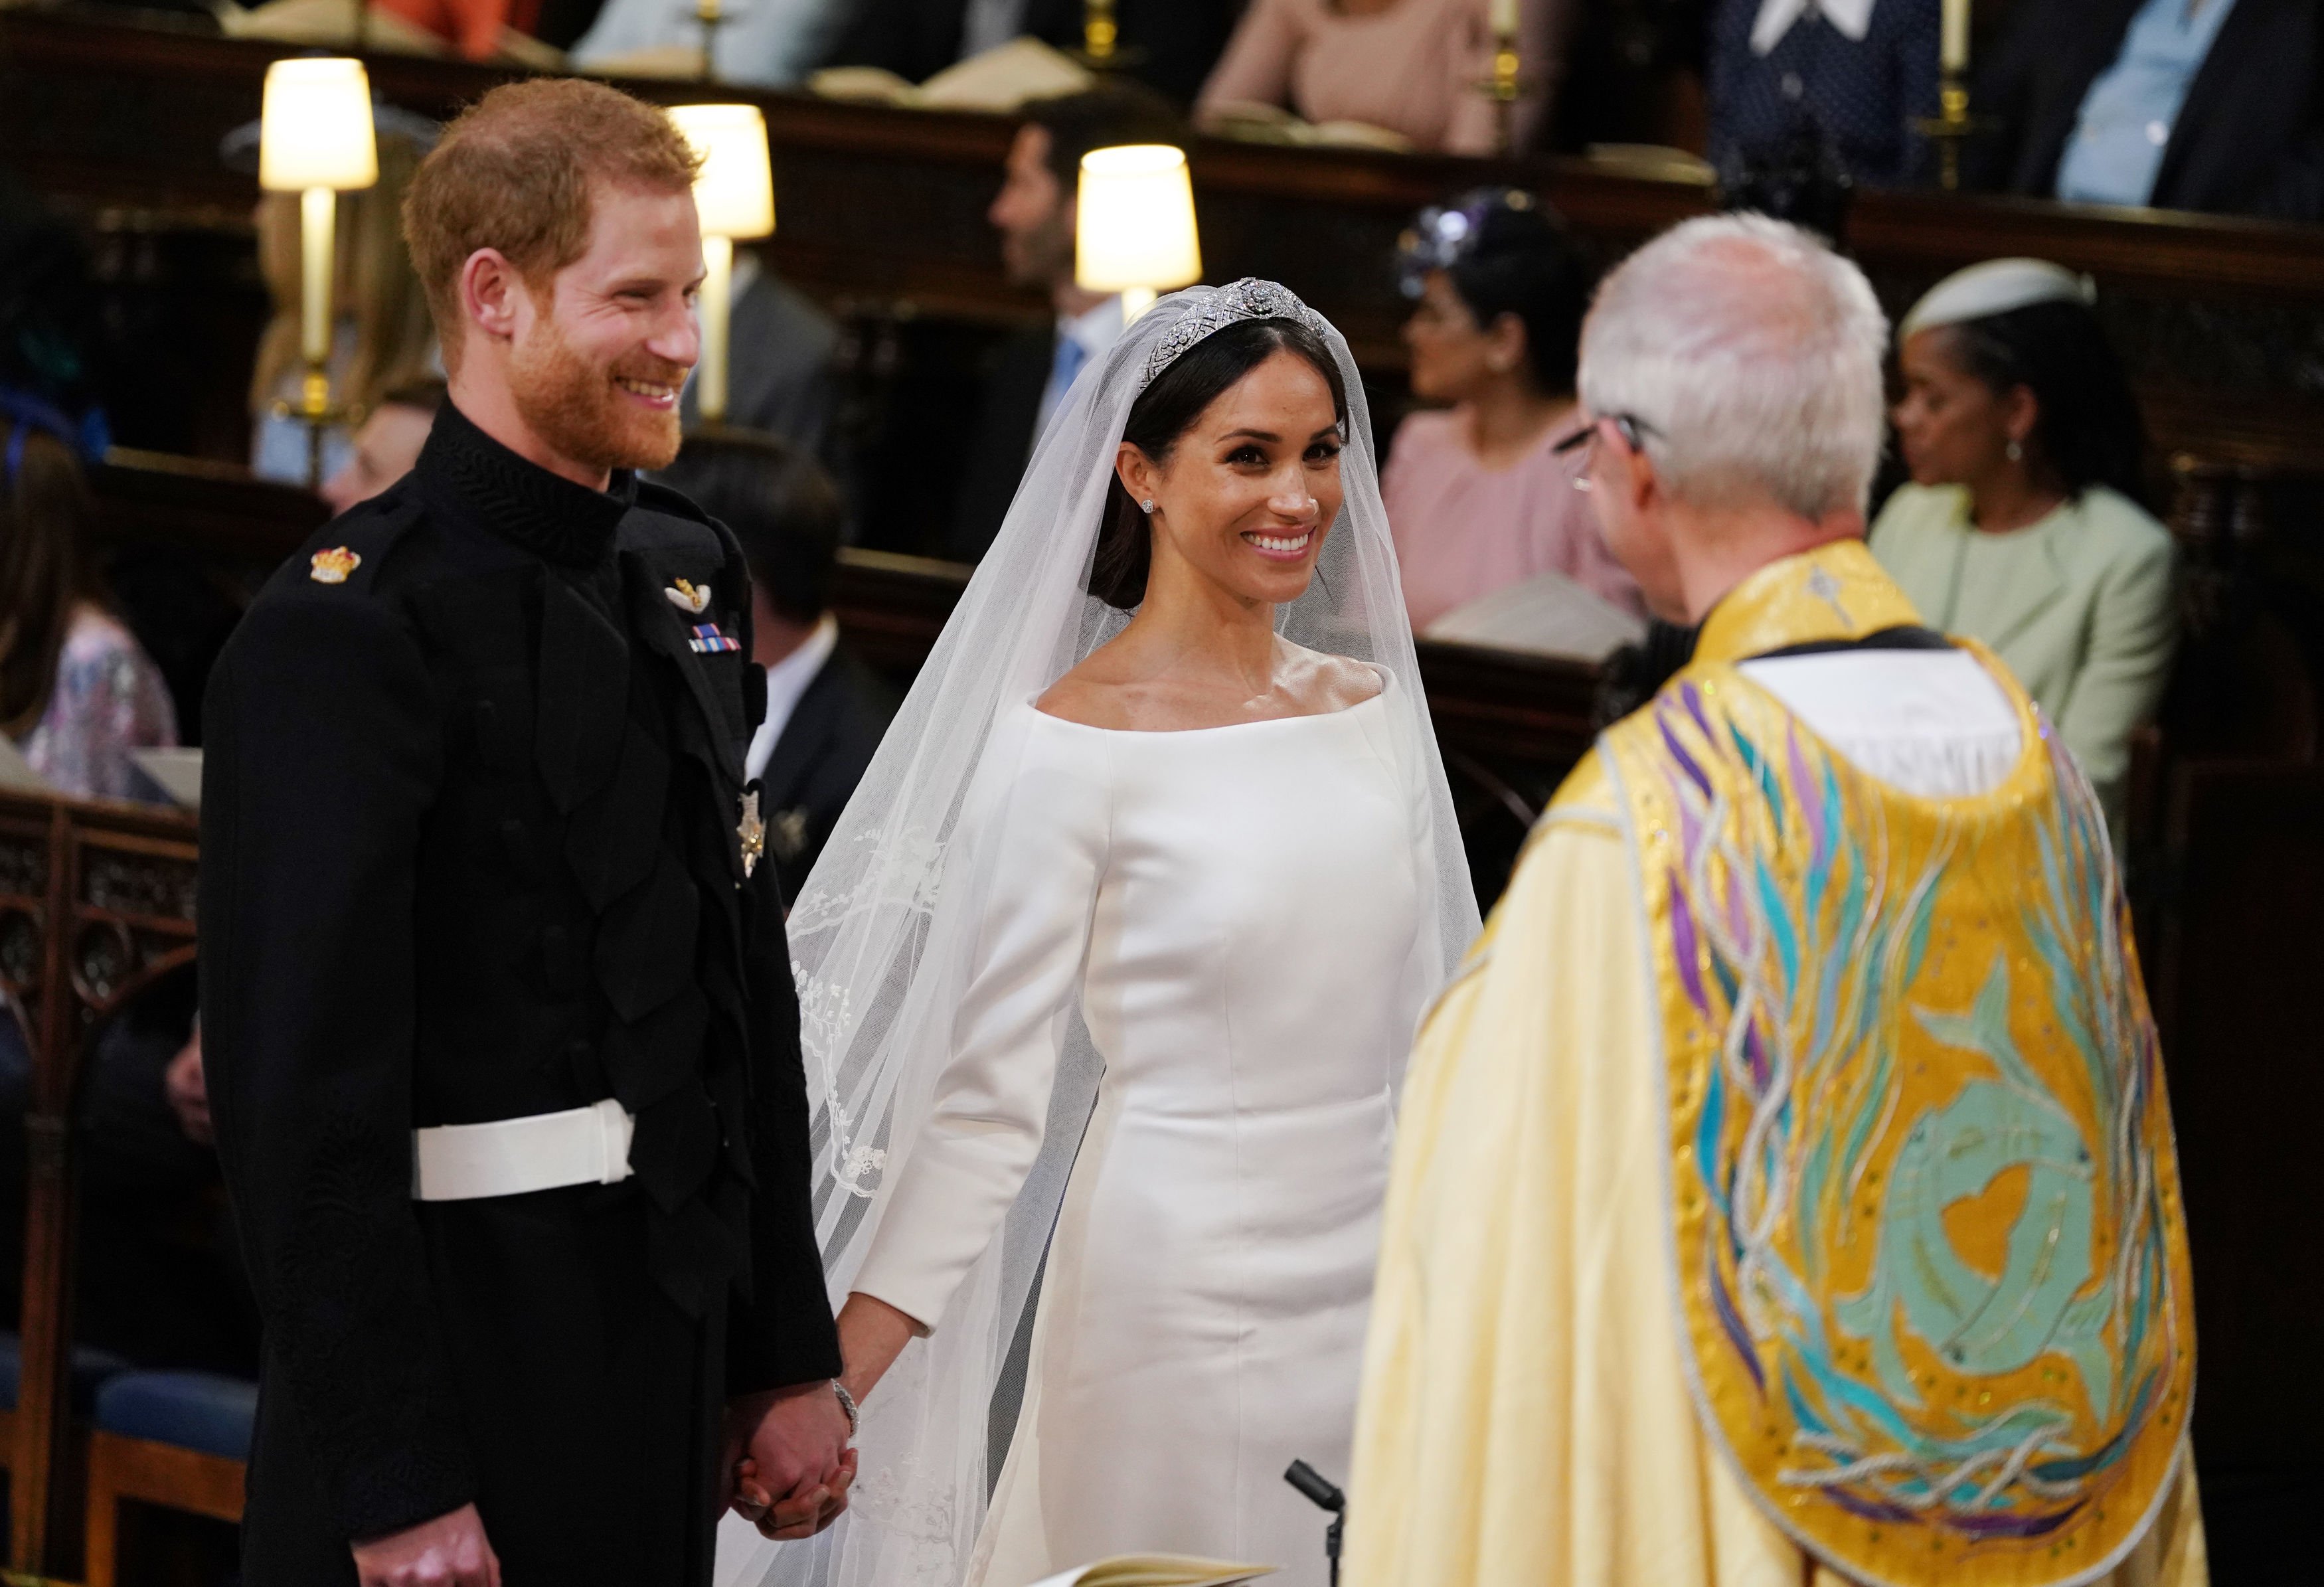 Prince Harry and Meghan Markle stand together at the High Altar during their wedding ceremony in St George's Chapel in Windsor Castle on May 19, 2018 in Windsor, England | Source: Getty Images